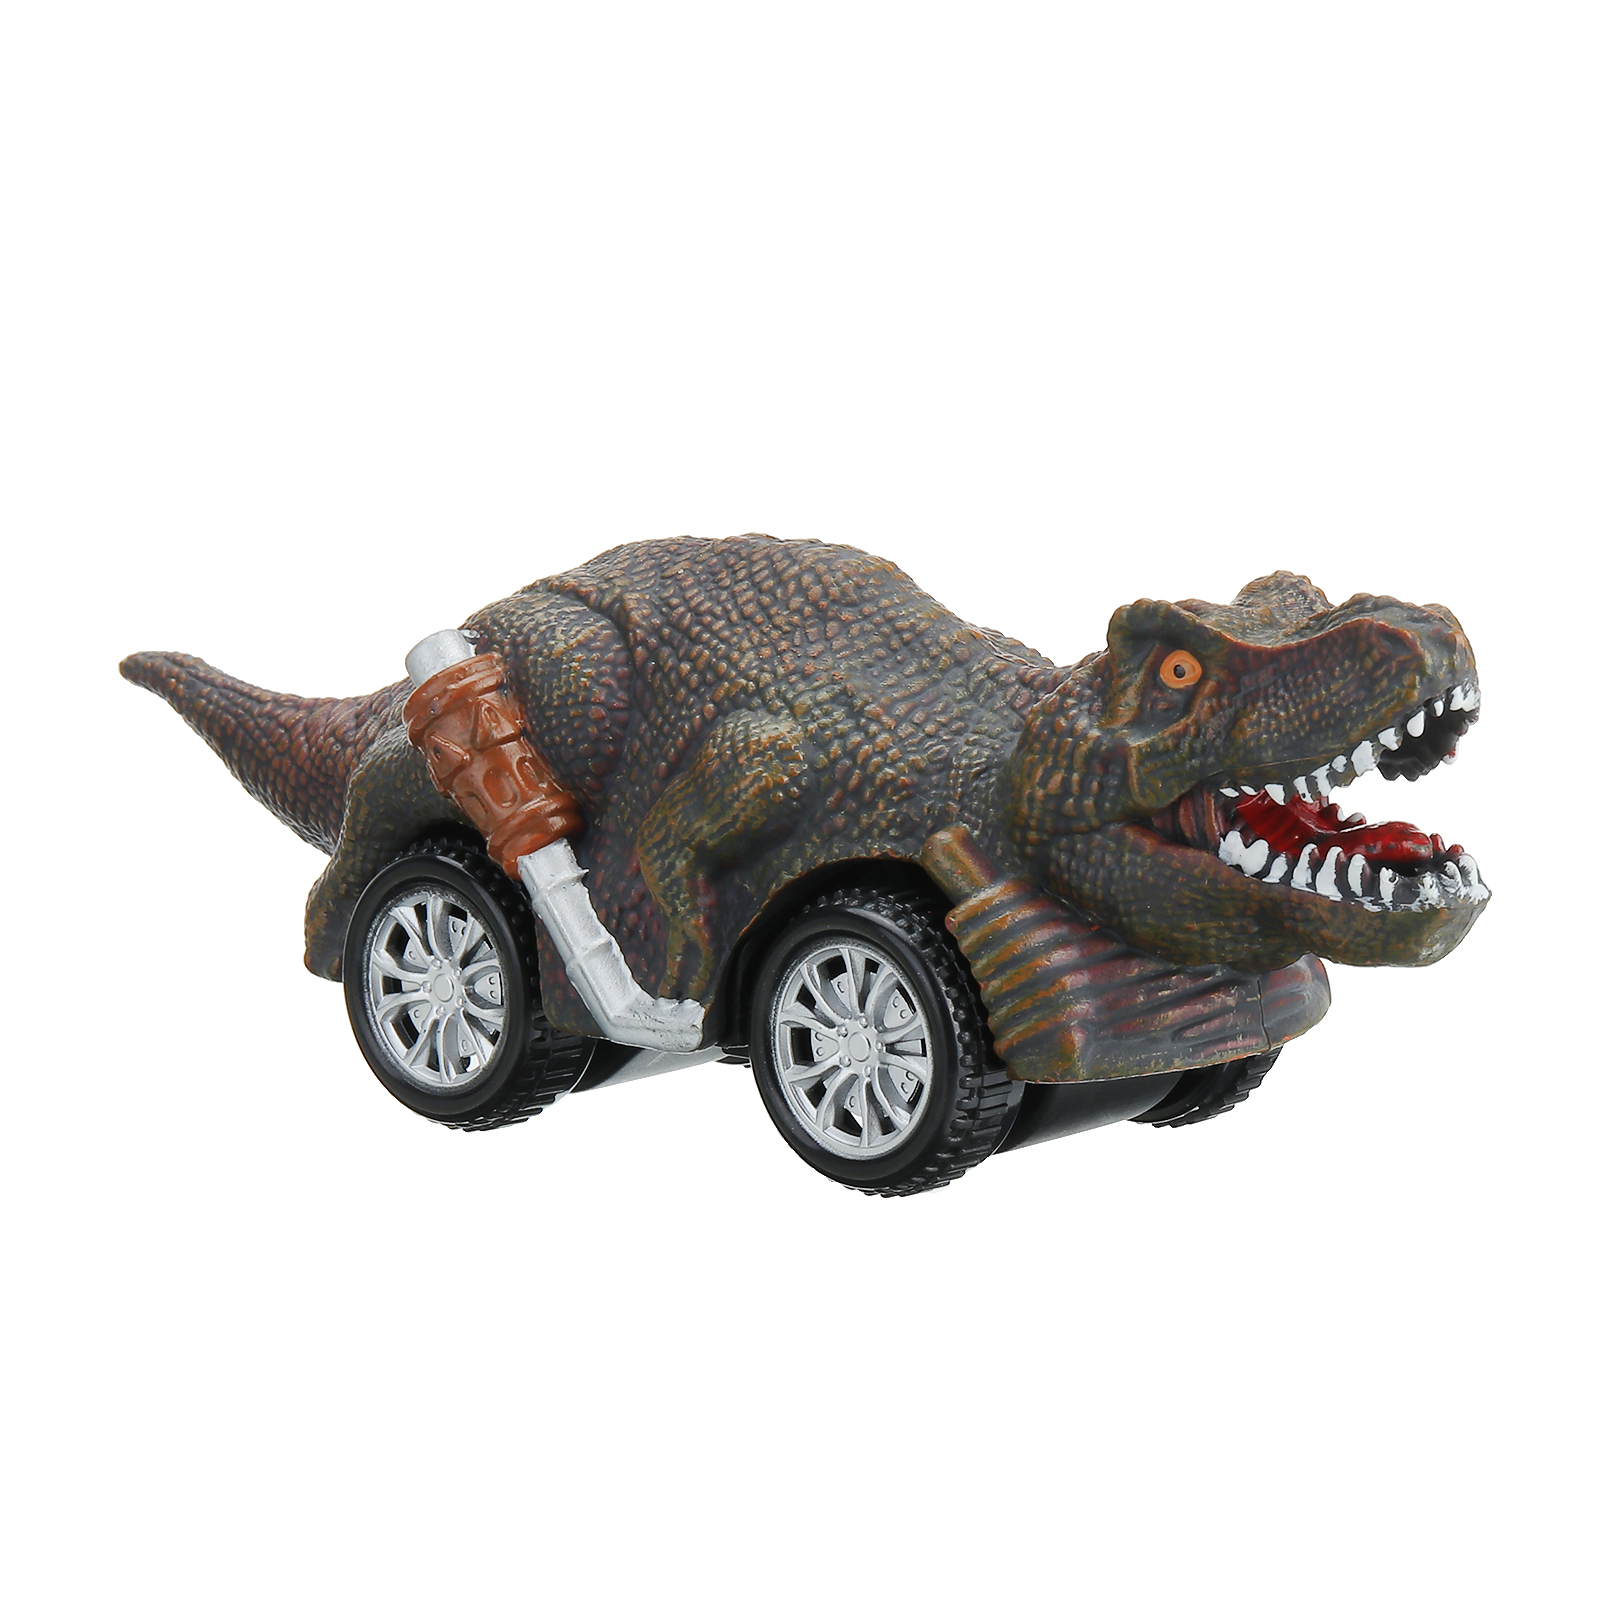 Pickwoo-Dinosaur-Toys-Cars-Inertia-Vehicles-Toddlers-Kids-Dinosaur-Party-Games-with-T-Rex-Dino-Toys--1895631-16